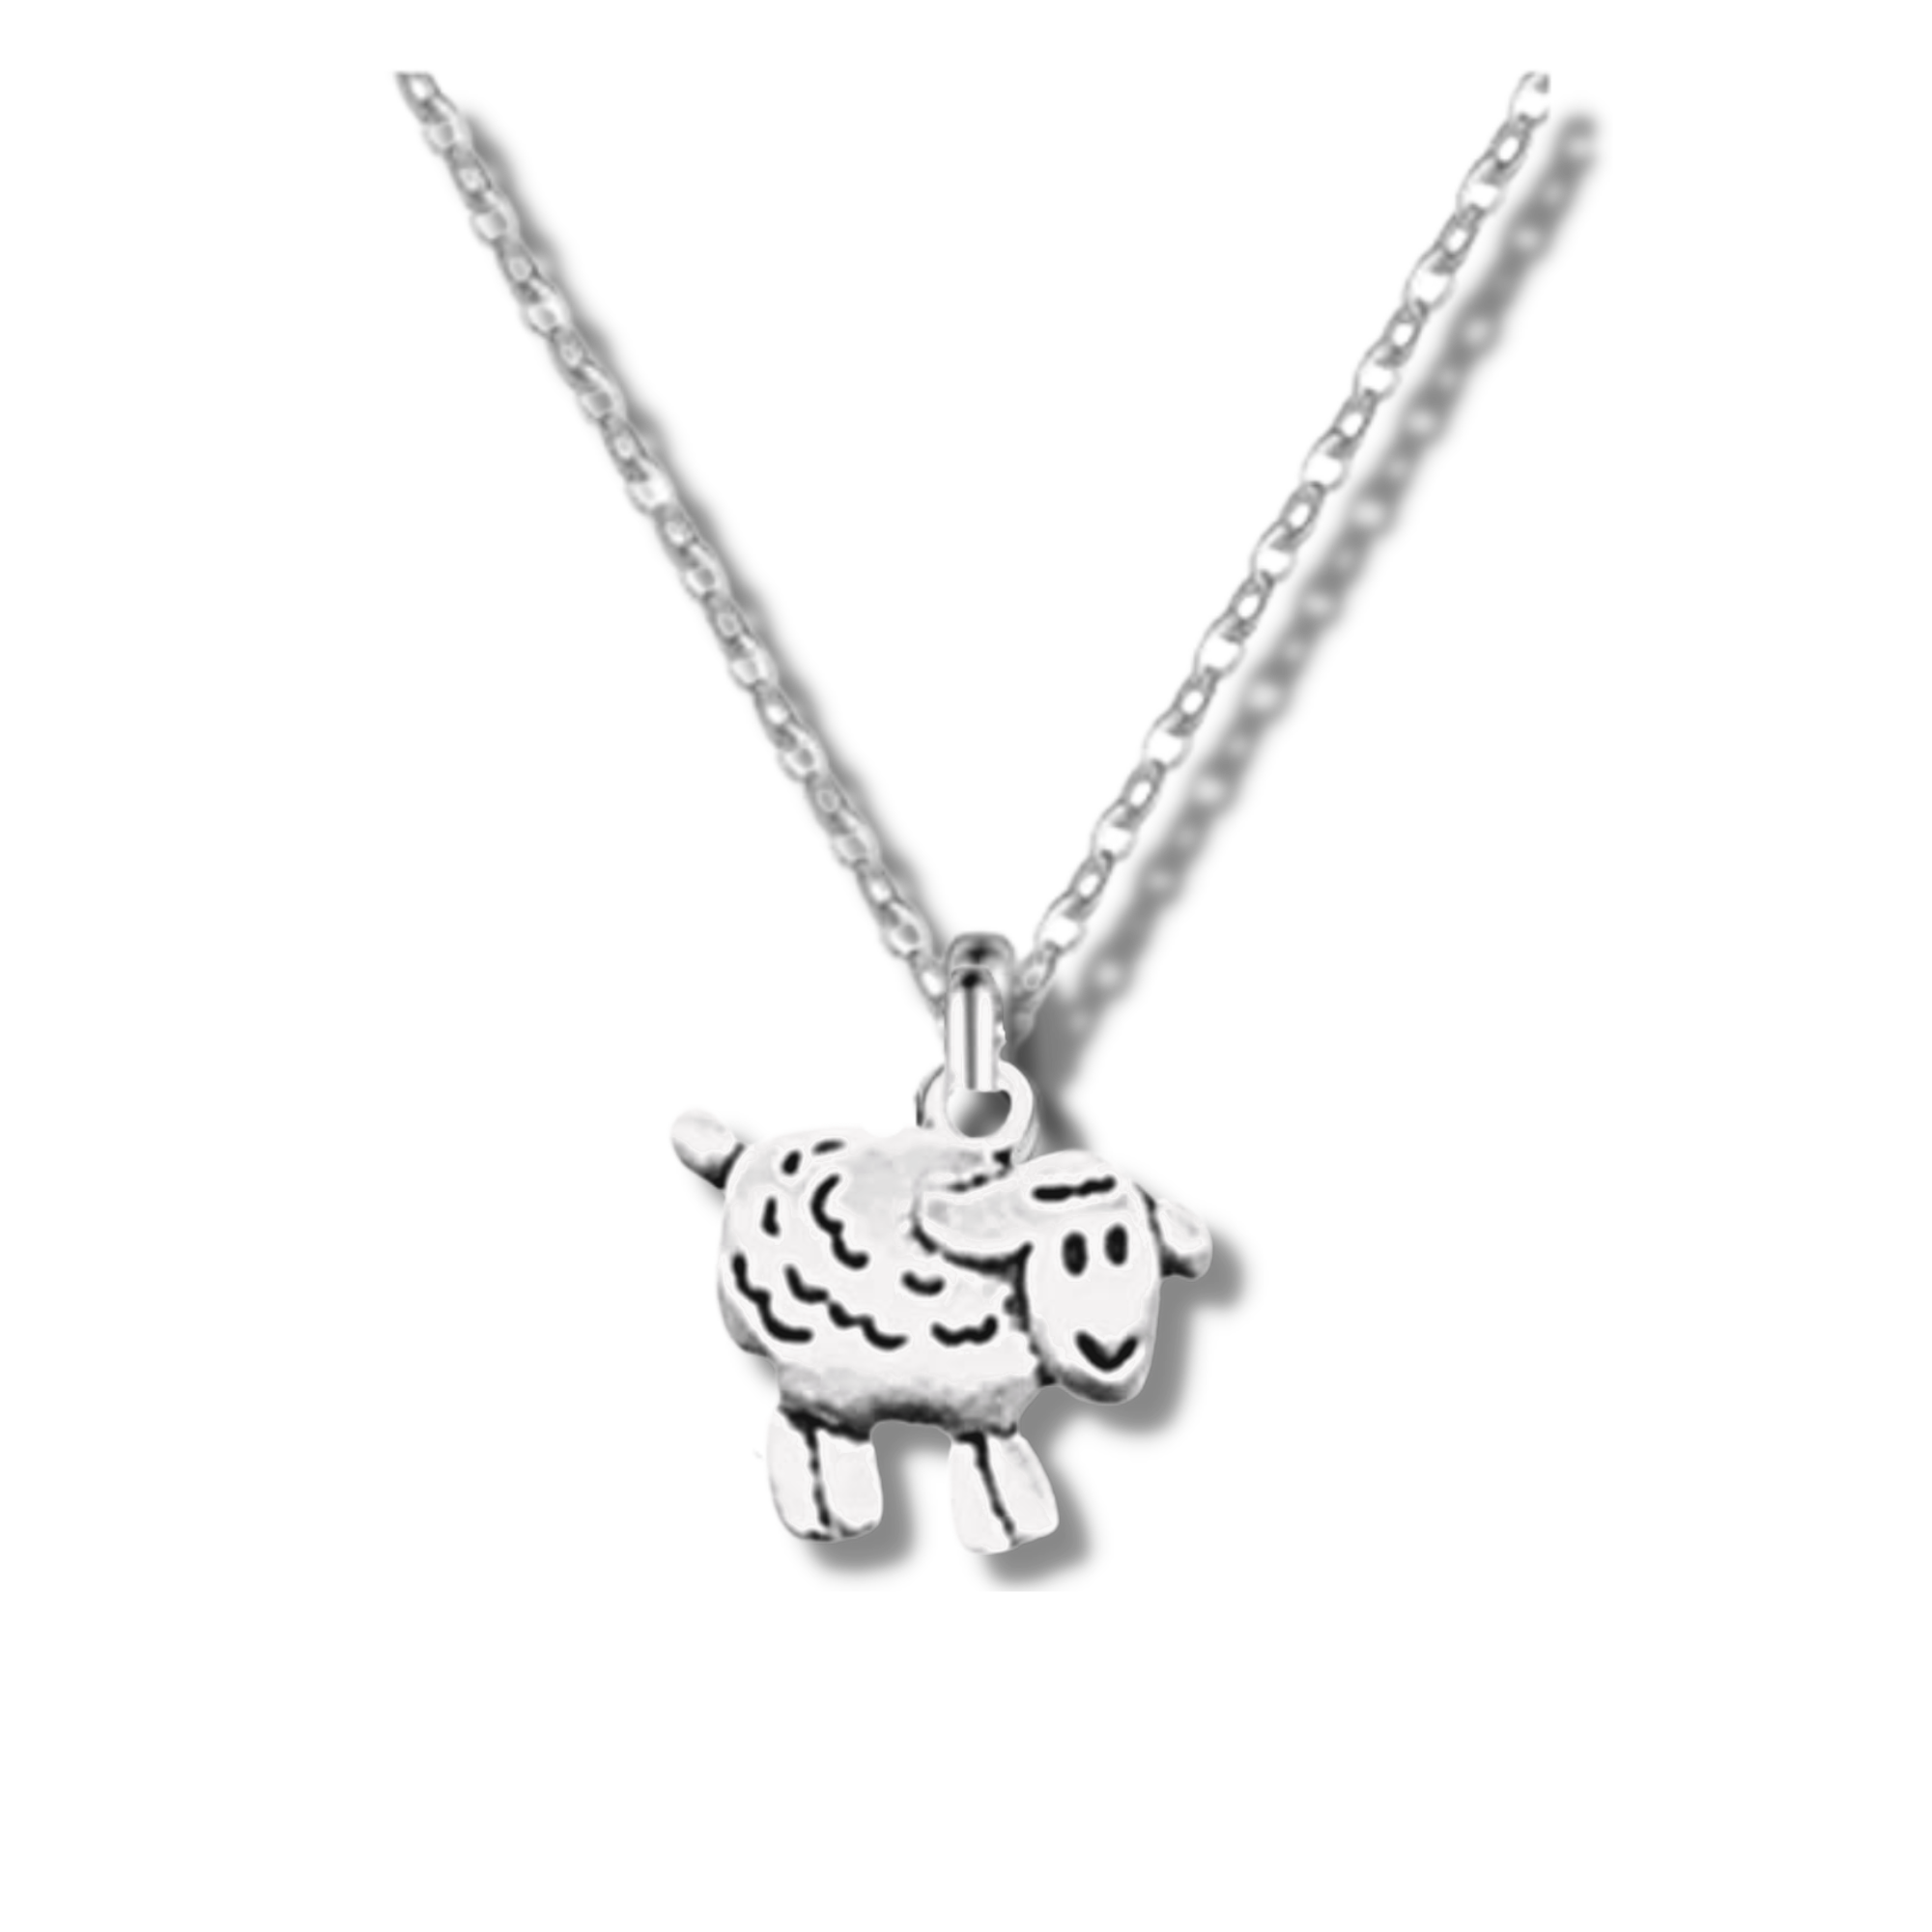 The Lost Sheep Necklace